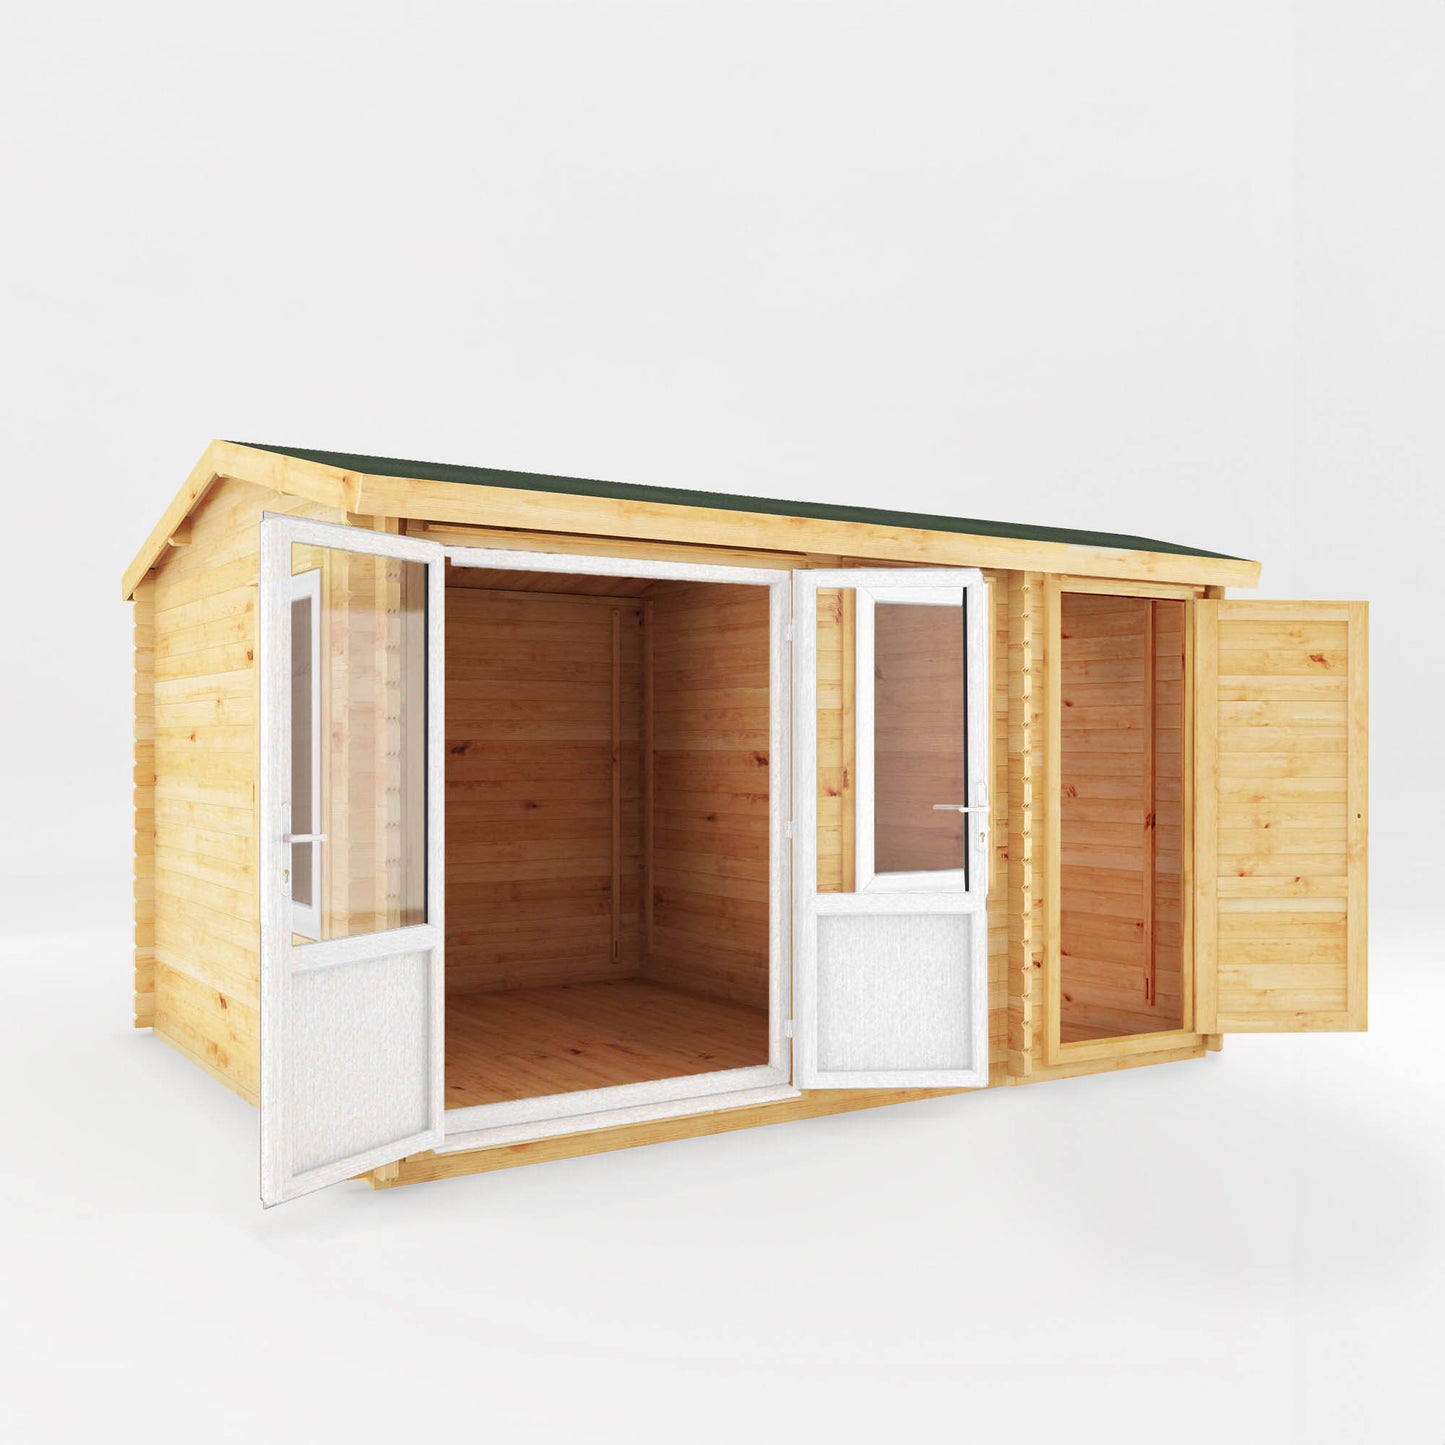 The 4.1m x 3m Robin Log Cabin with Side Shed and White UPVC